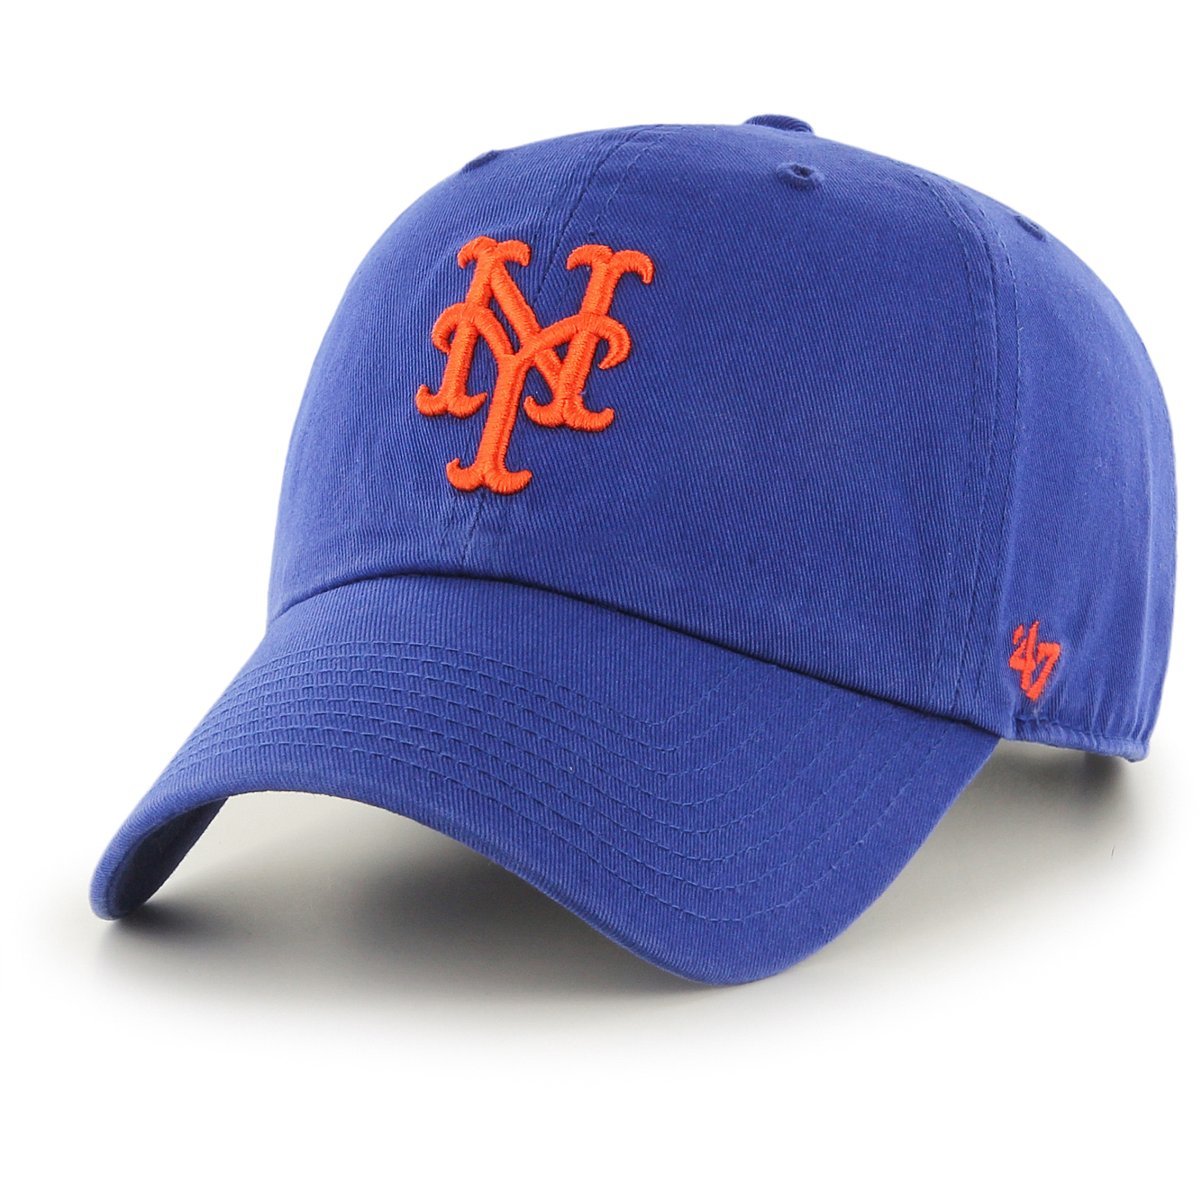 Buy 47 Brand Relaxed Fit Cap - MLB New York Mets royal